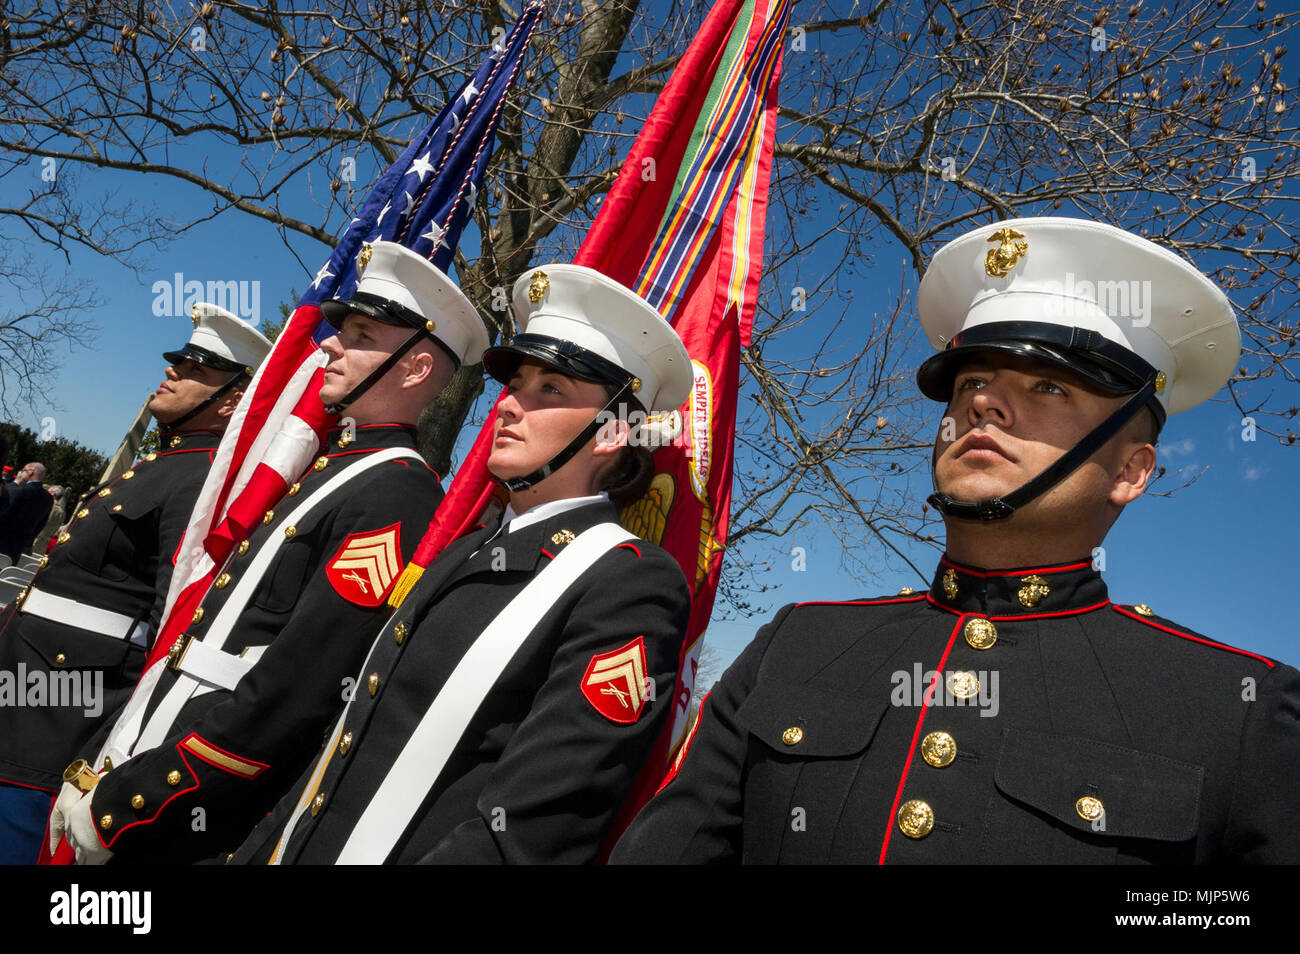 U.S. Marines with Marine Corps Base Quantico Color Guard greet guests attending the Presidential wreath laying ceremony held at the final resting place of the 4th President of the United States, James Madison, also known as the Father of the Constitution, at his home at Montpelier, Orange, Va., March 16, 2018. This event was held in commemoration of the 267th anniversary of the birth of Madison, born in 1751, and has also been decreed as James Madison Appreciation Day for the Commonwealth of Virginia. Armed Forces and civilians displaying courage bravery dedication commitment and sacrifice Stock Photo